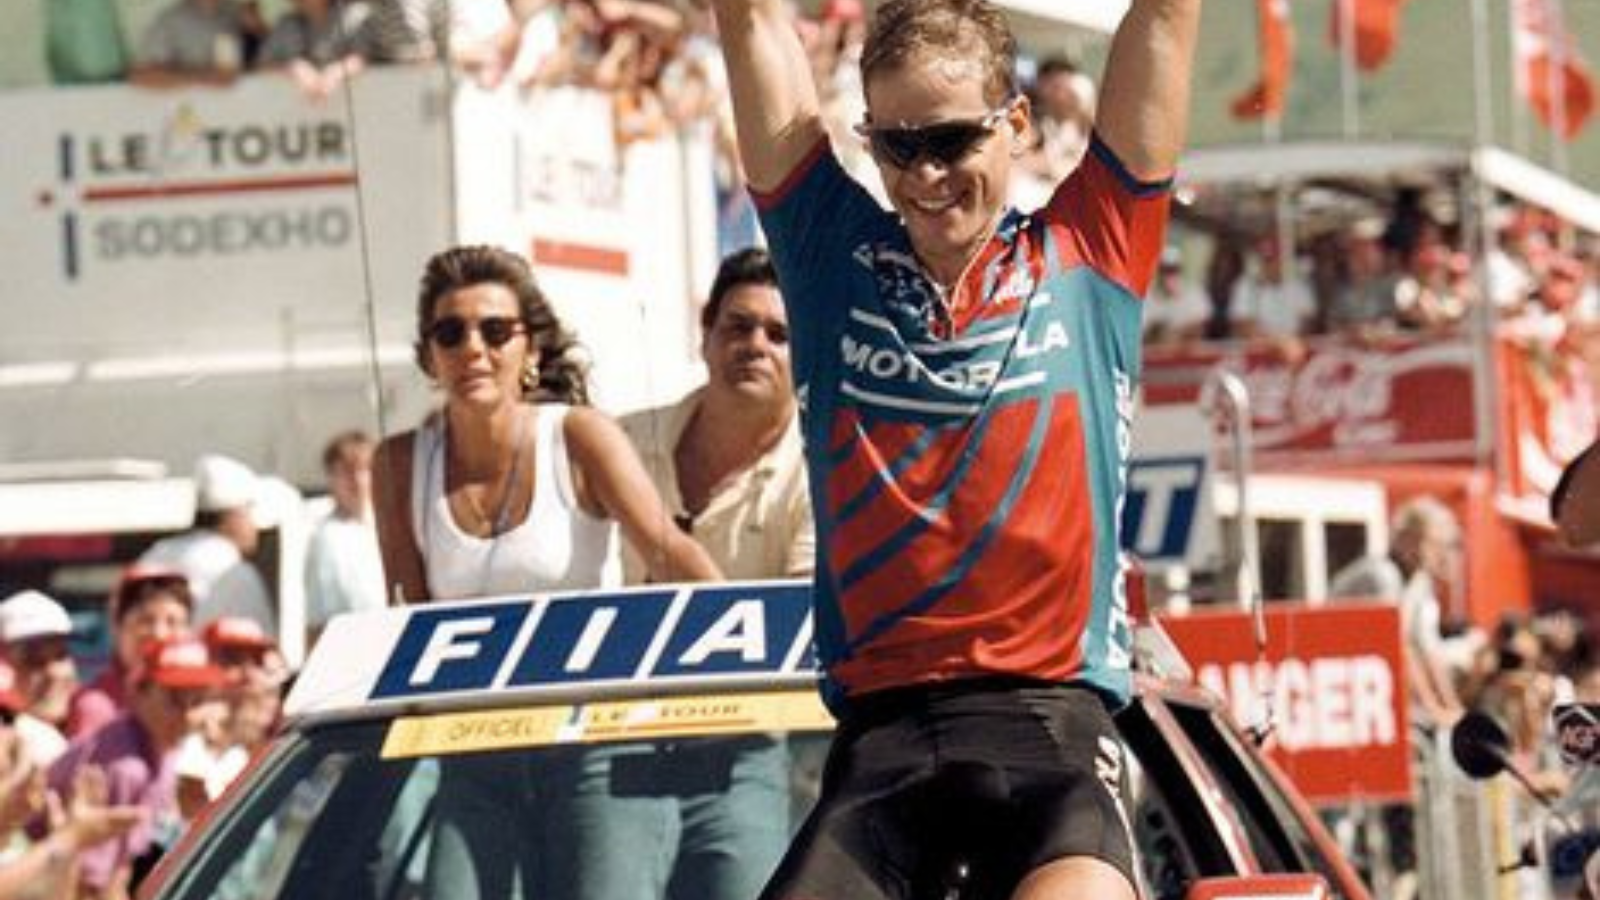 Andrew Hampsten crosses the finish line on the top of Alpe d'Huez at the Tour de France in 1992